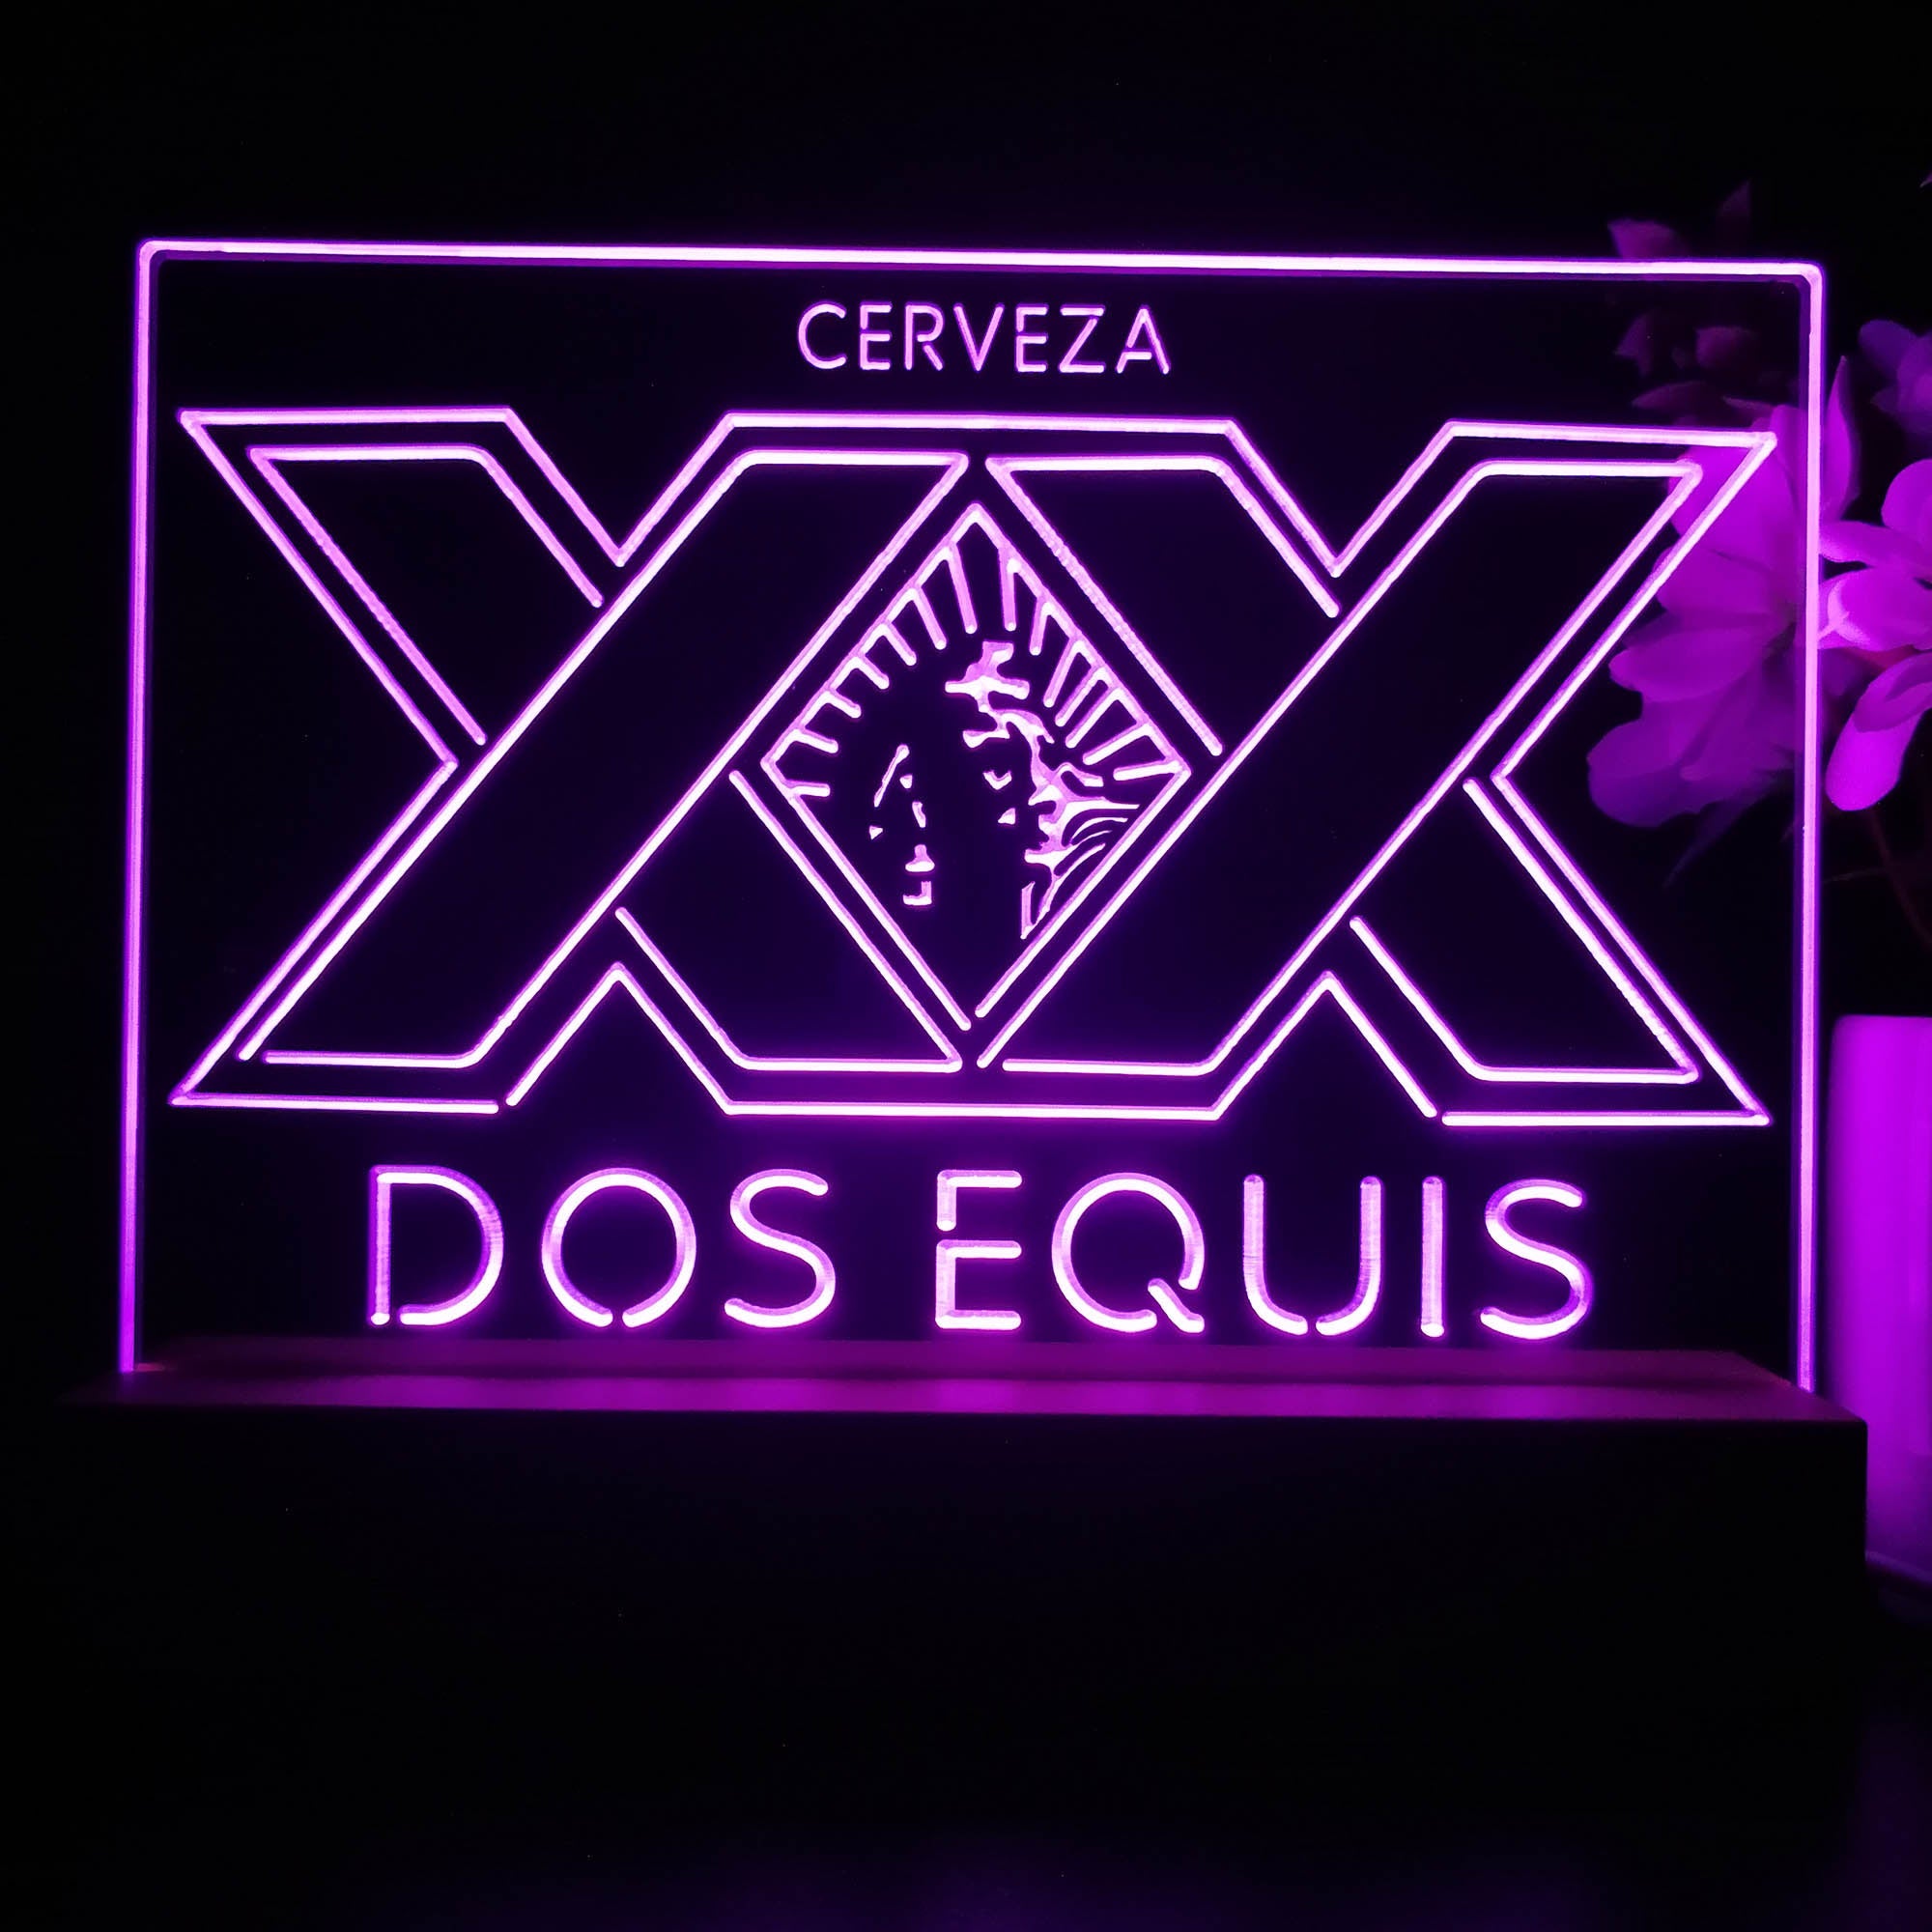 XX Dos Equis Beer Neon Sign Pub Bar Lamp